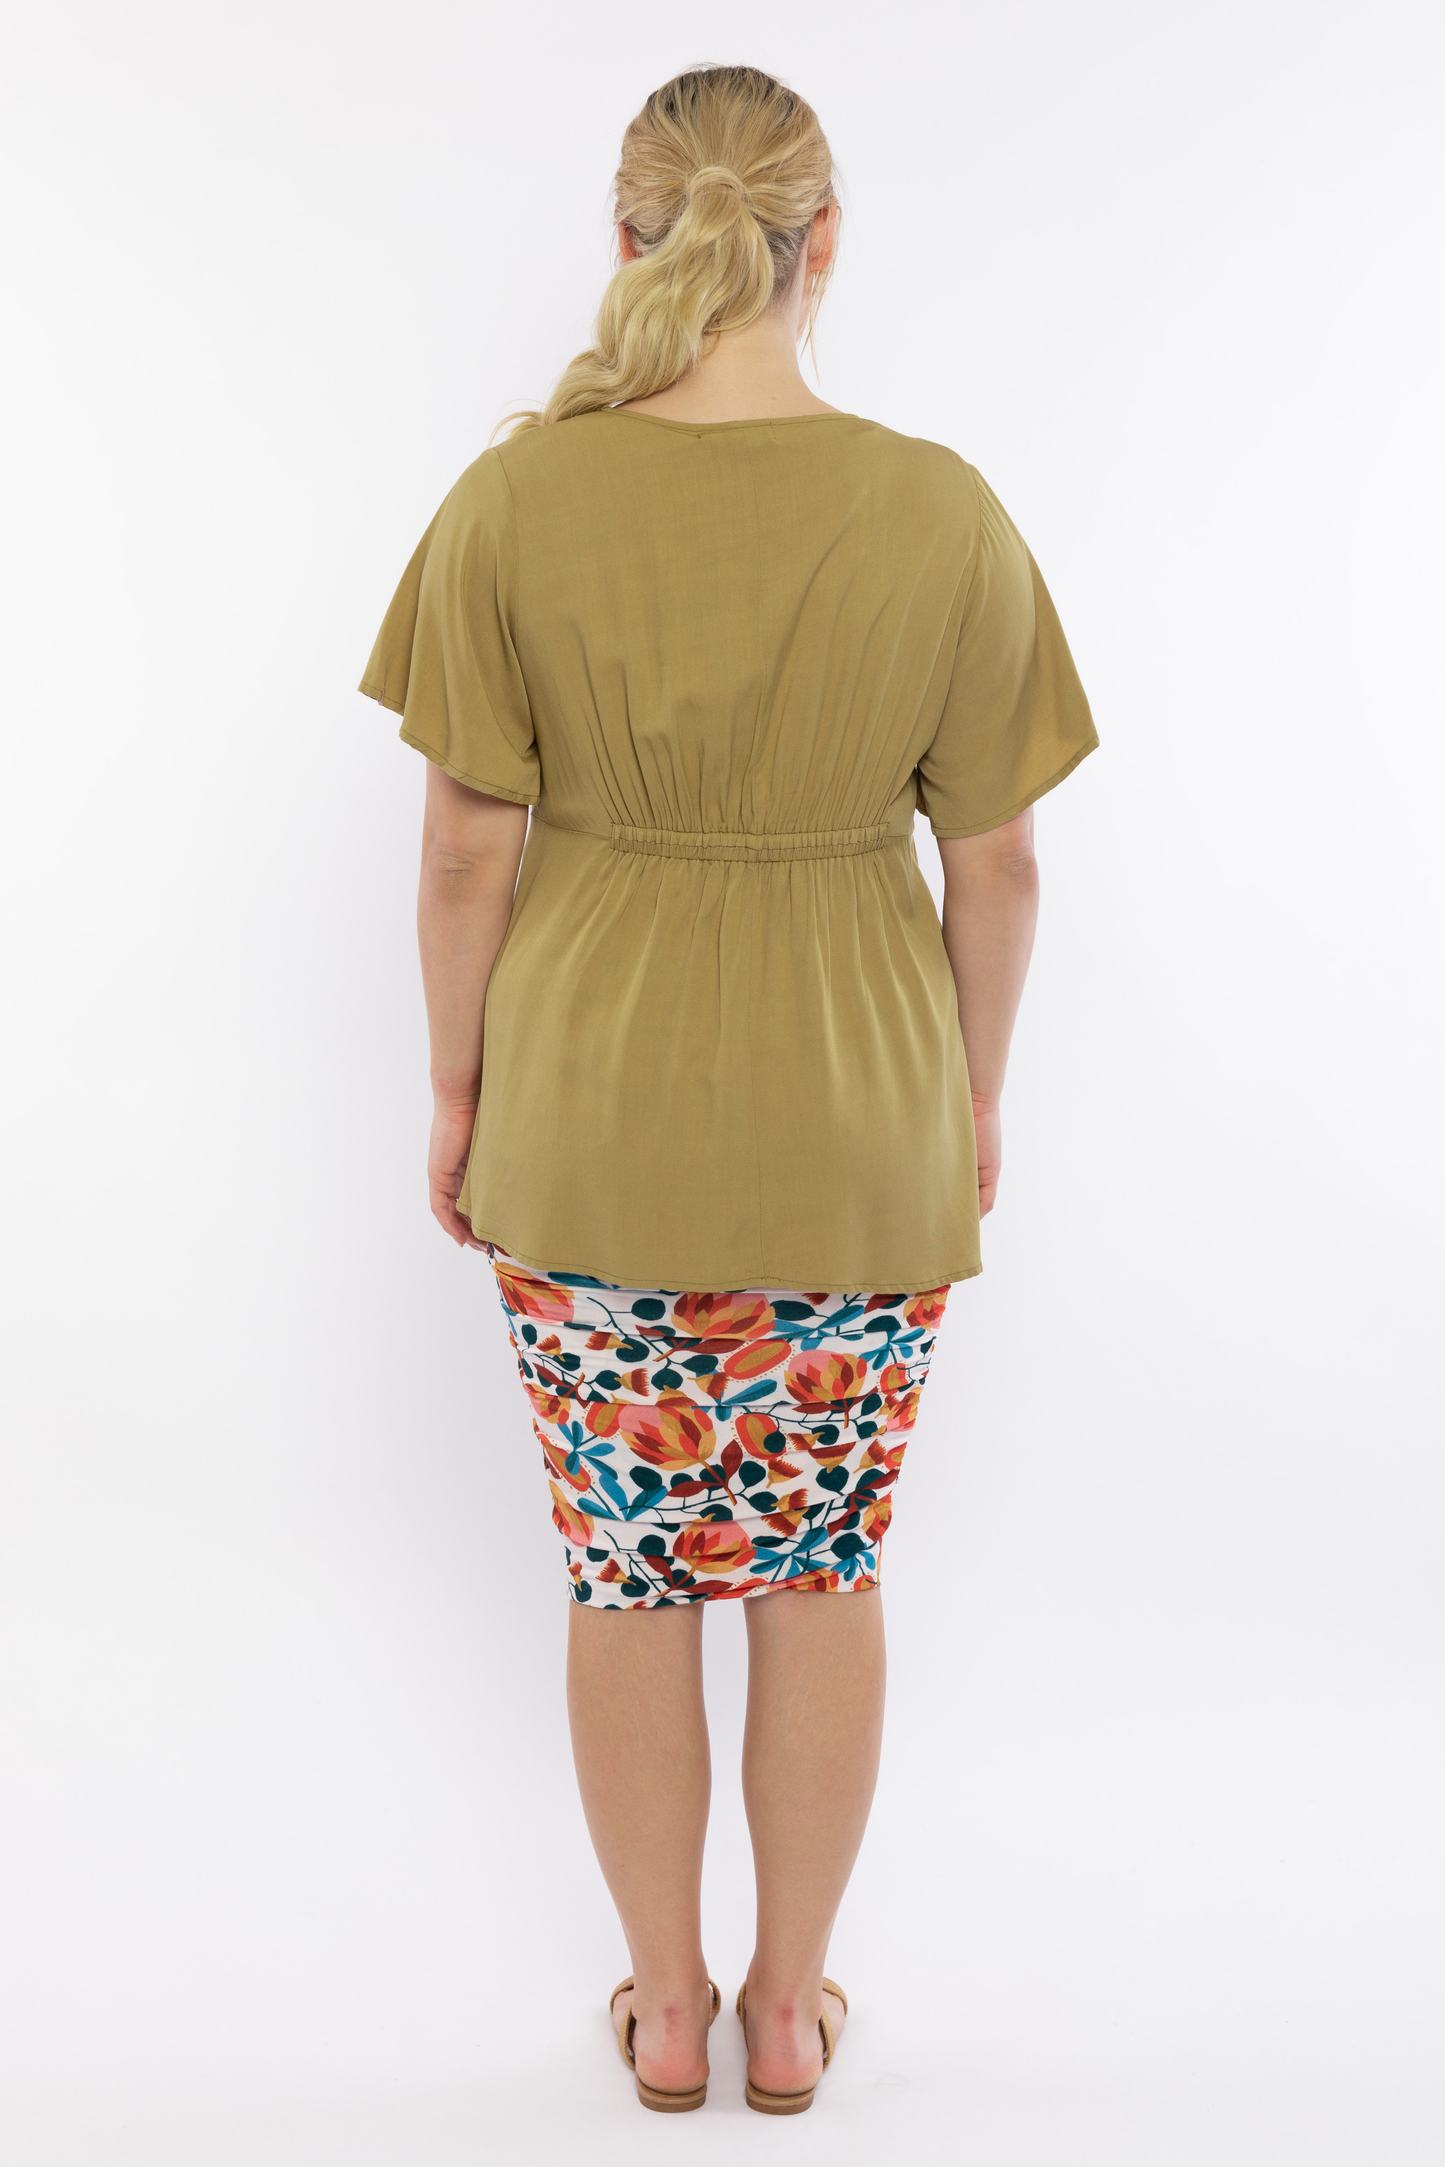 Poetry Top in Olive